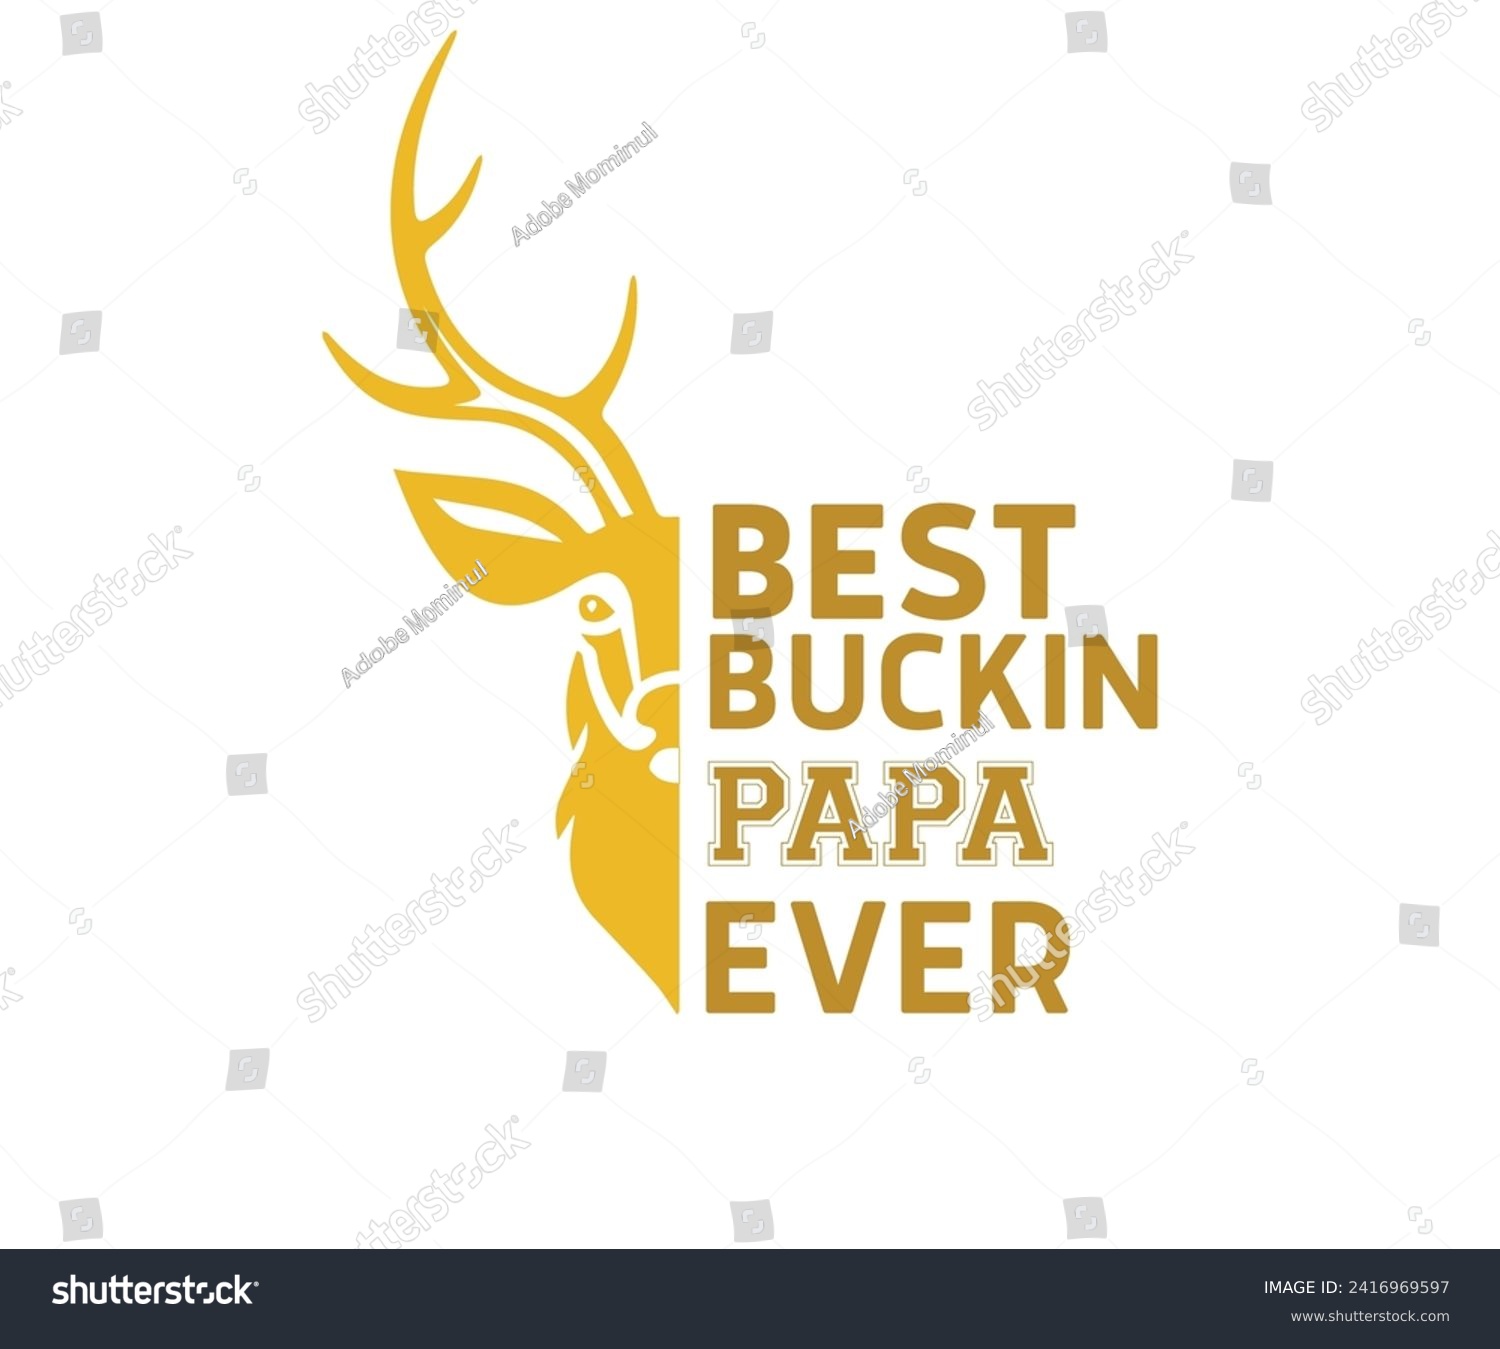 SVG of Best Buckin Papa Ever Svg,Father's Day Svg,Papa svg,Grandpa Svg,Father's Day Saying Qoutes,Dad Svg,Funny Father, Gift For Dad Svg,Daddy Svg,Family Svg,T shirt Design,Svg Cut File,Typography svg